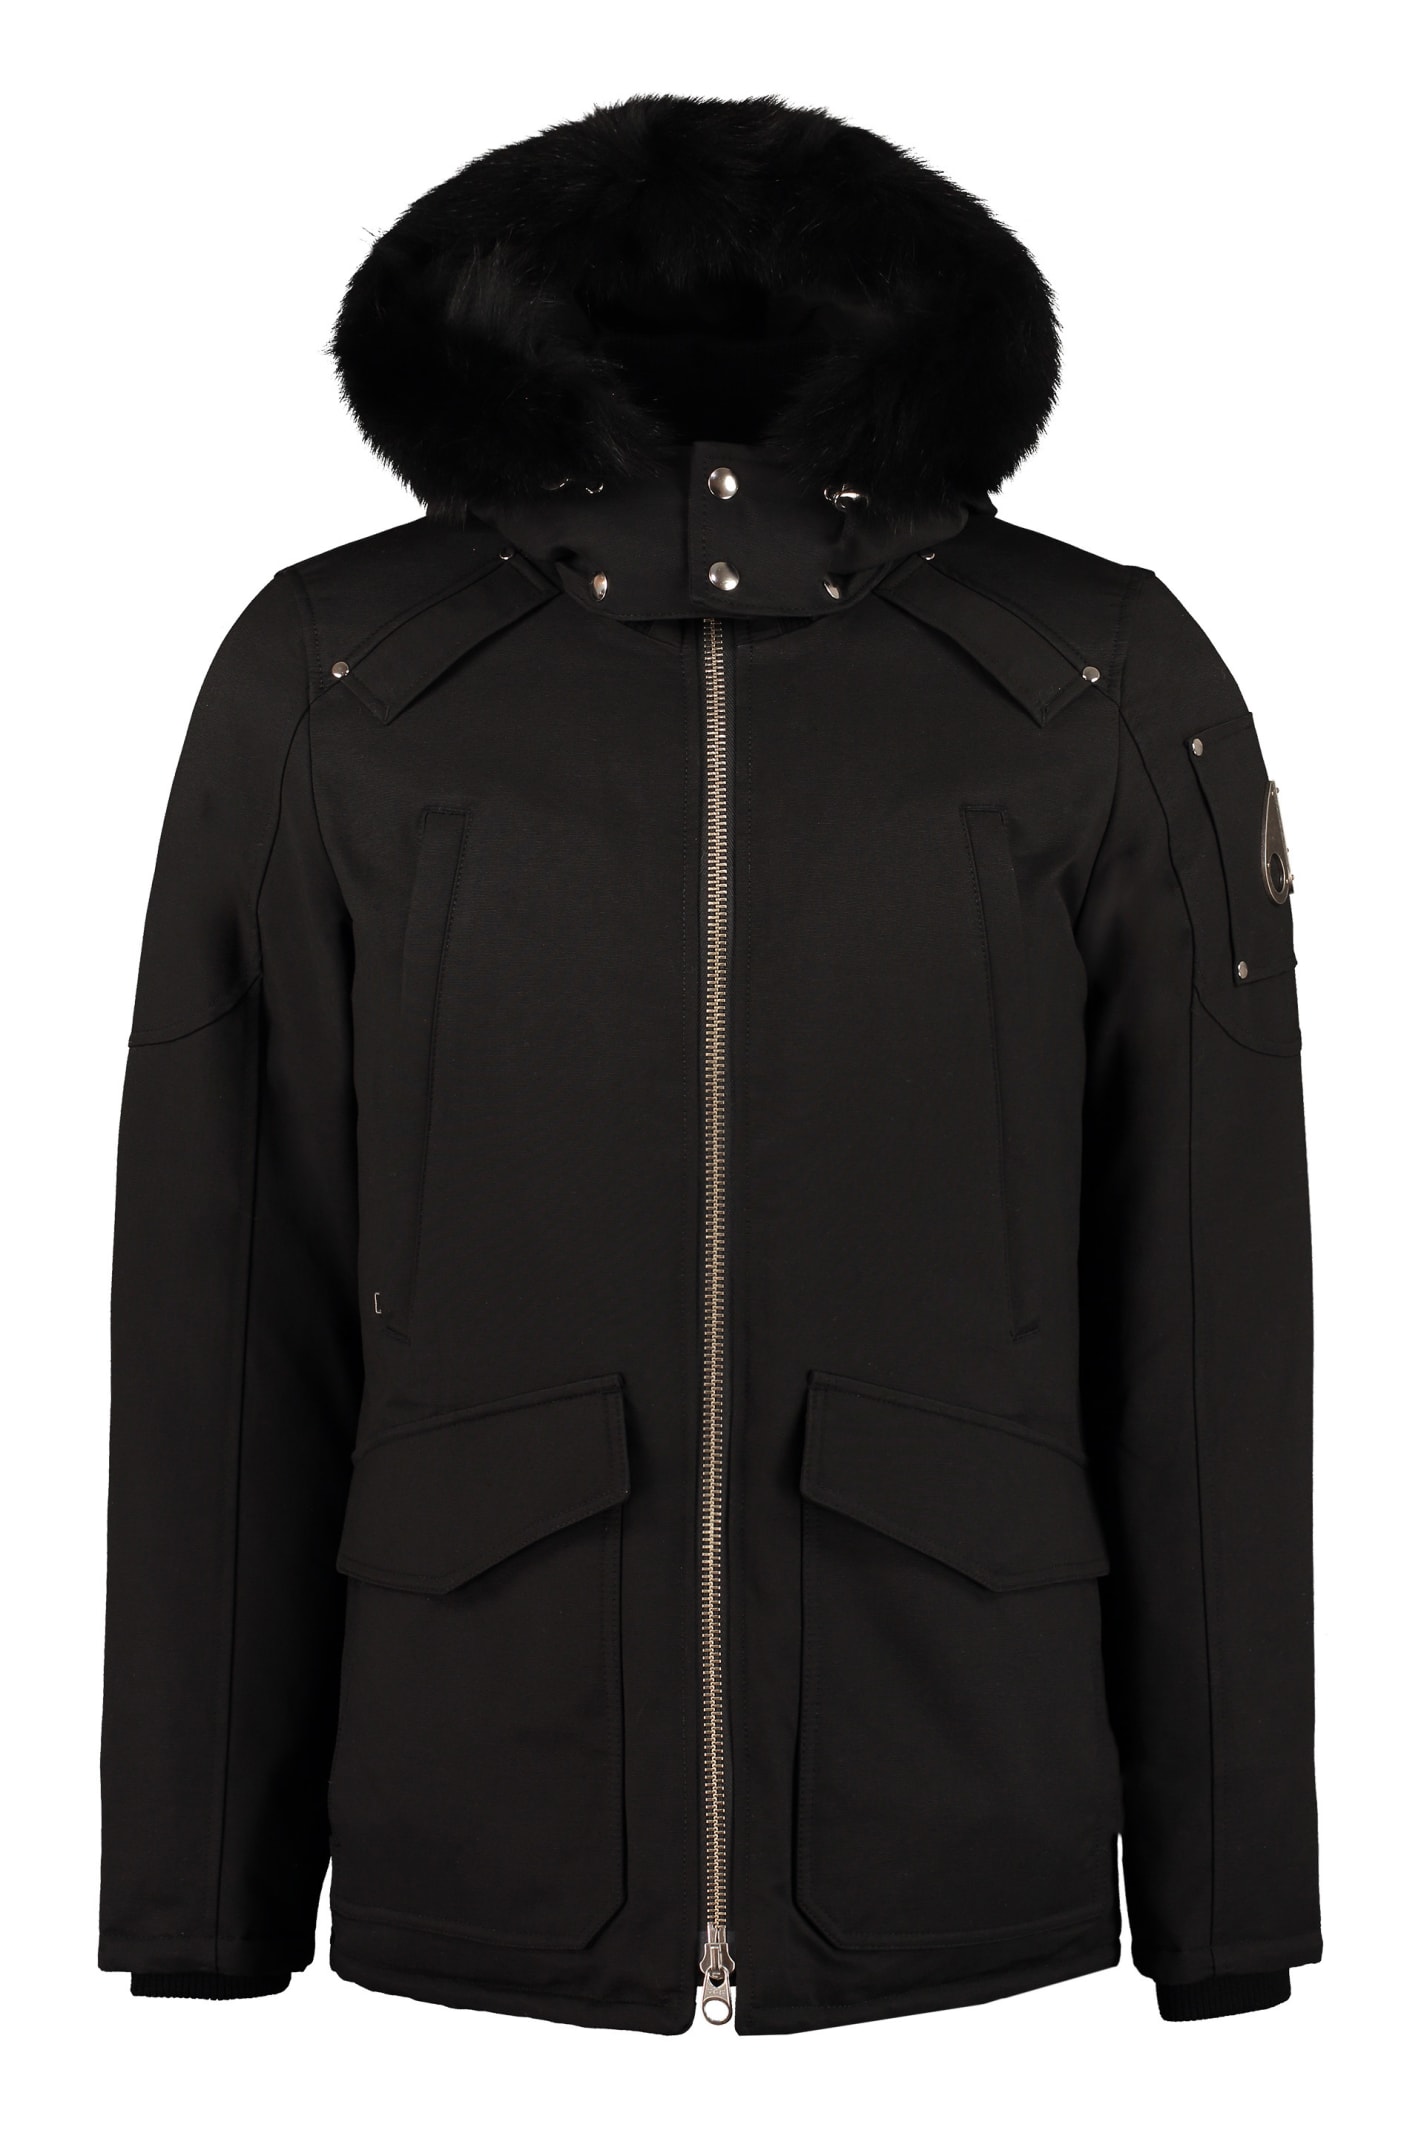 Moose Knuckles Pearson Hooded Parka